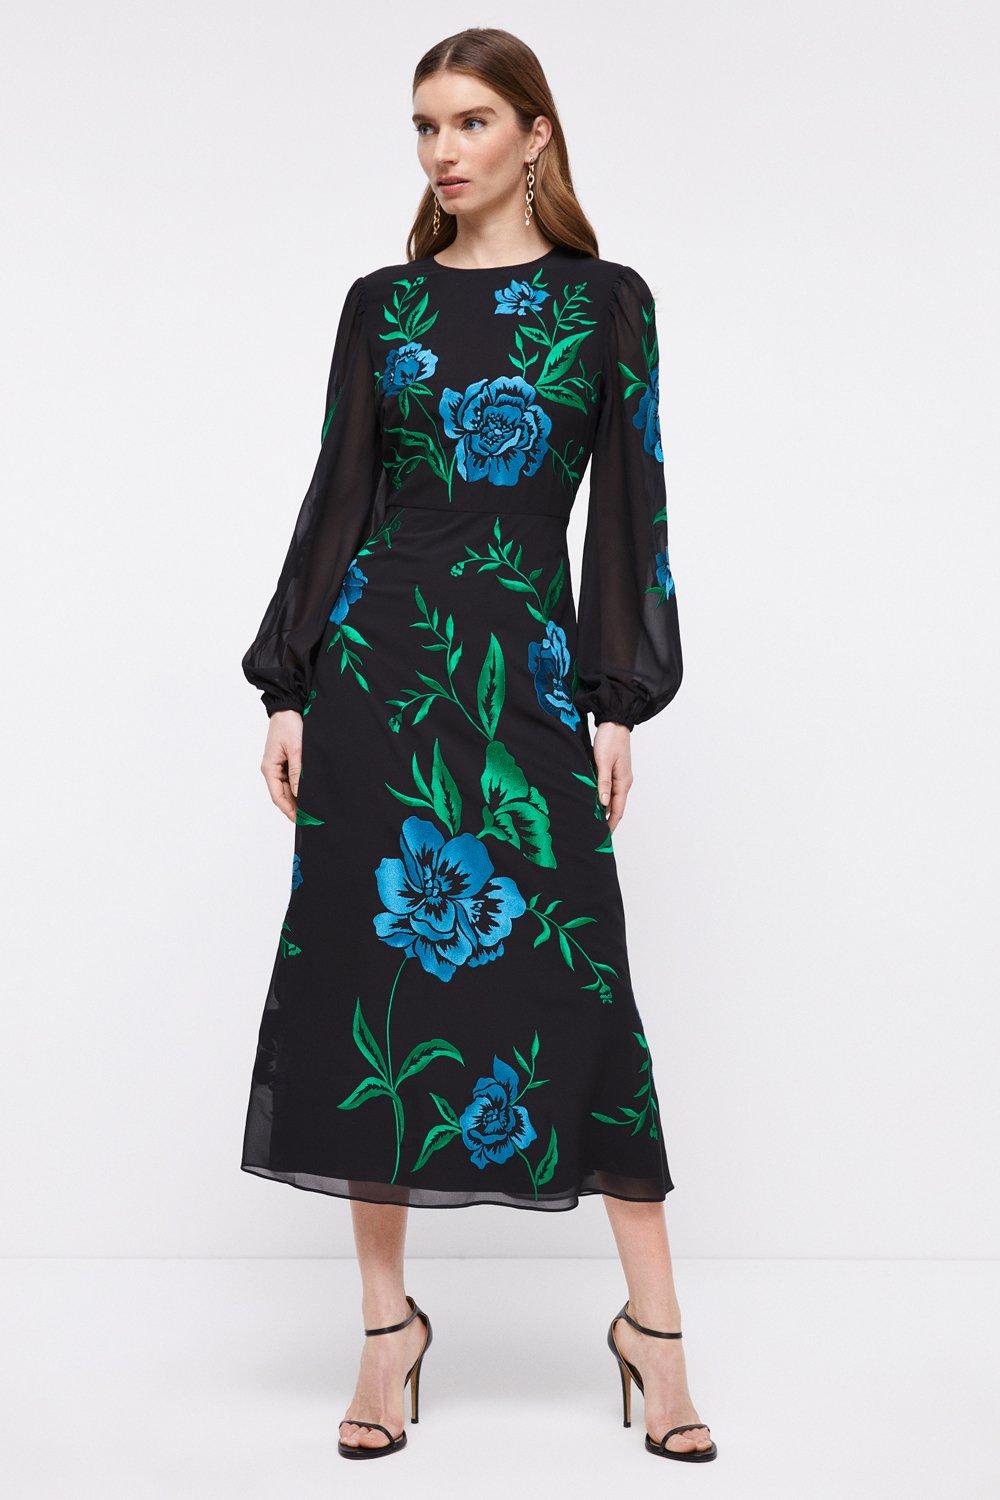 Petite Blooming Marigold Embroidered Dress - Black